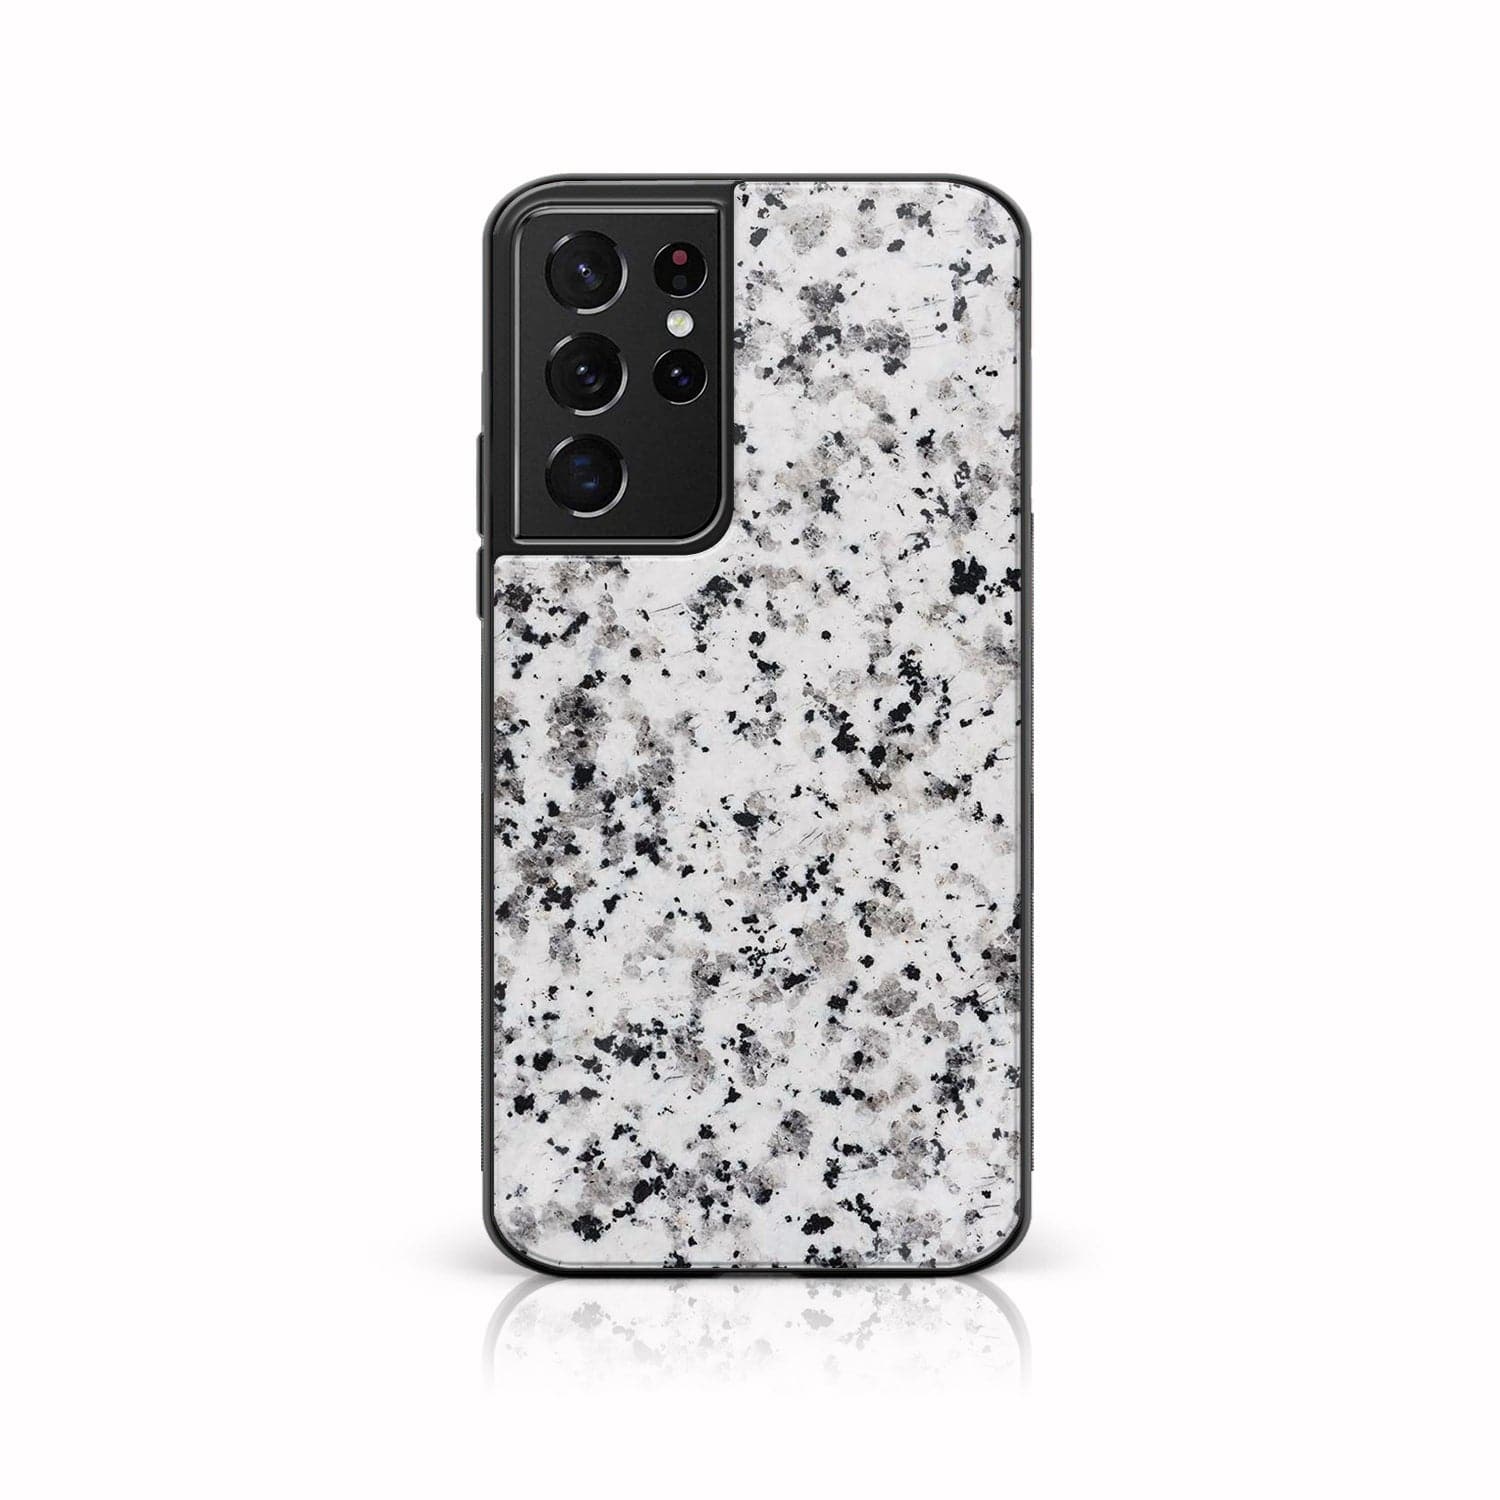 Galaxy S21 Ultra - White Marble Series - Premium Printed Glass soft Bumper shock Proof Case